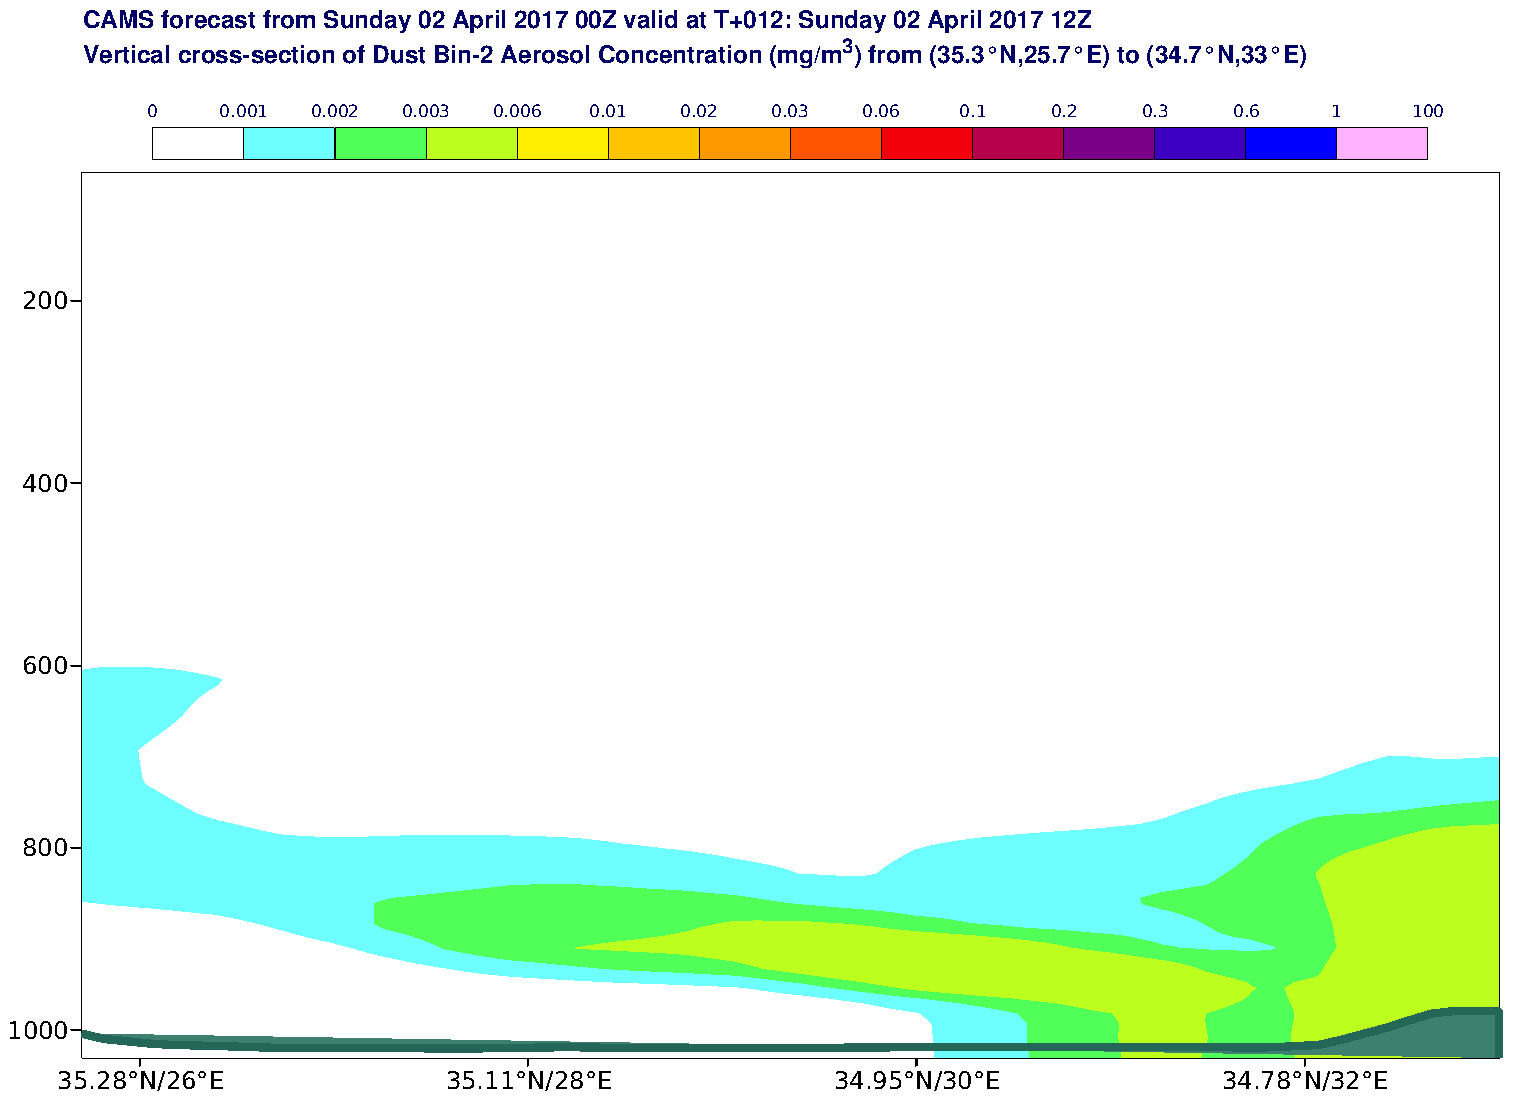 Vertical cross-section of Dust Bin-2 Aerosol Concentration (mg/m3) valid at T12 - 2017-04-02 12:00